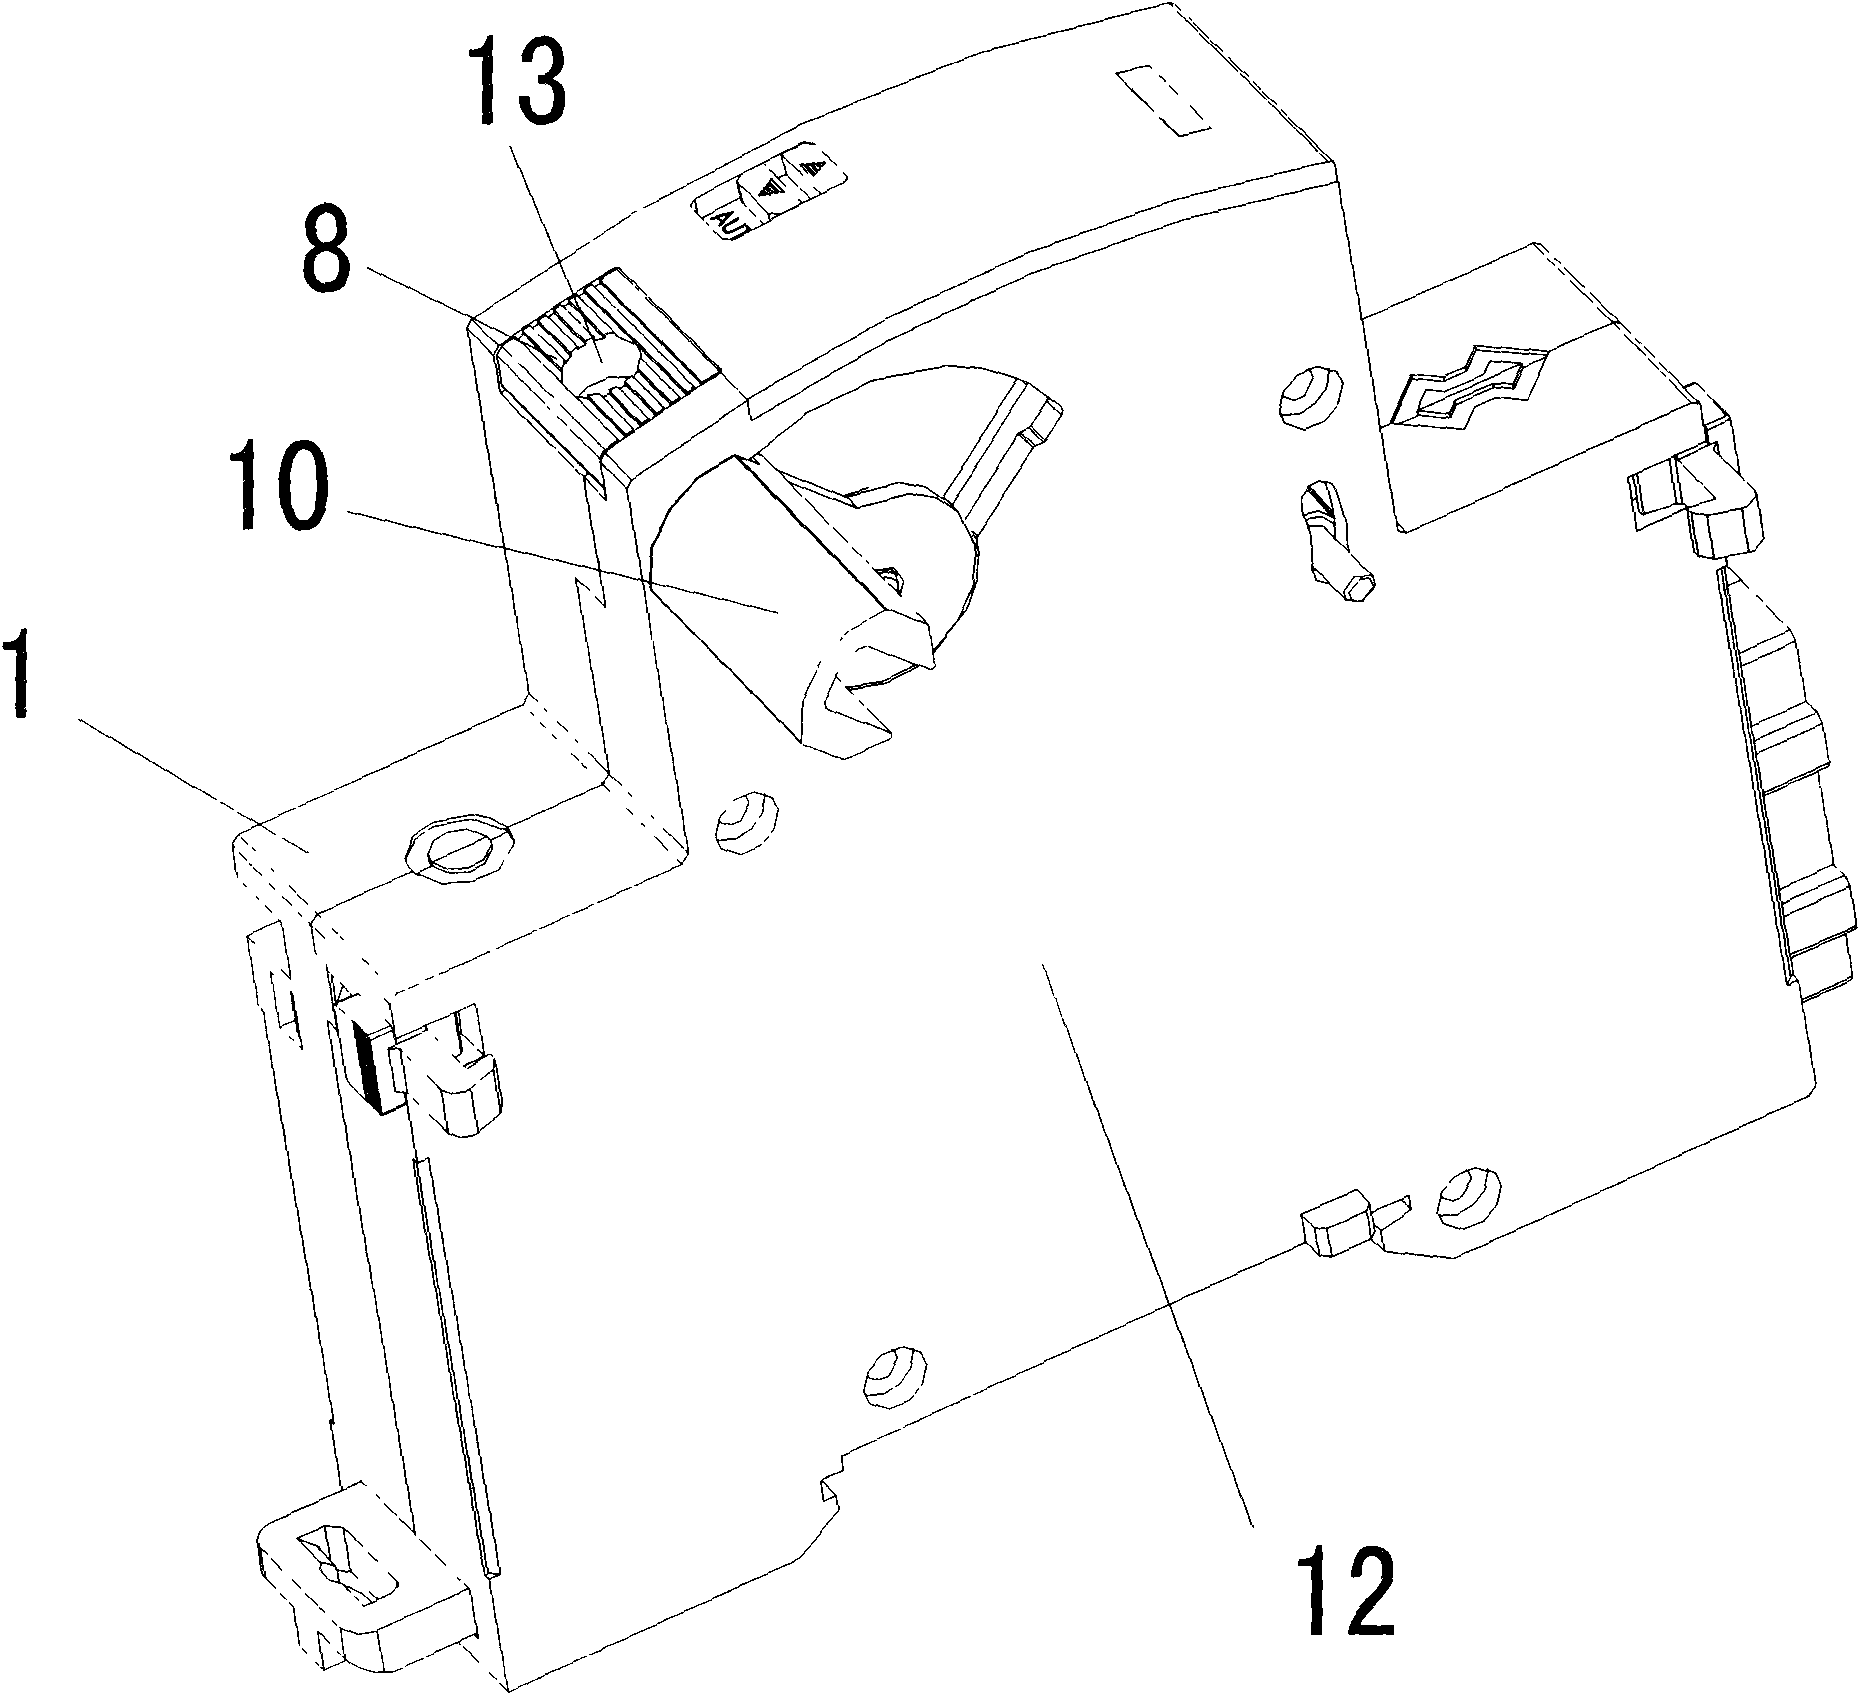 Power-driven operation device